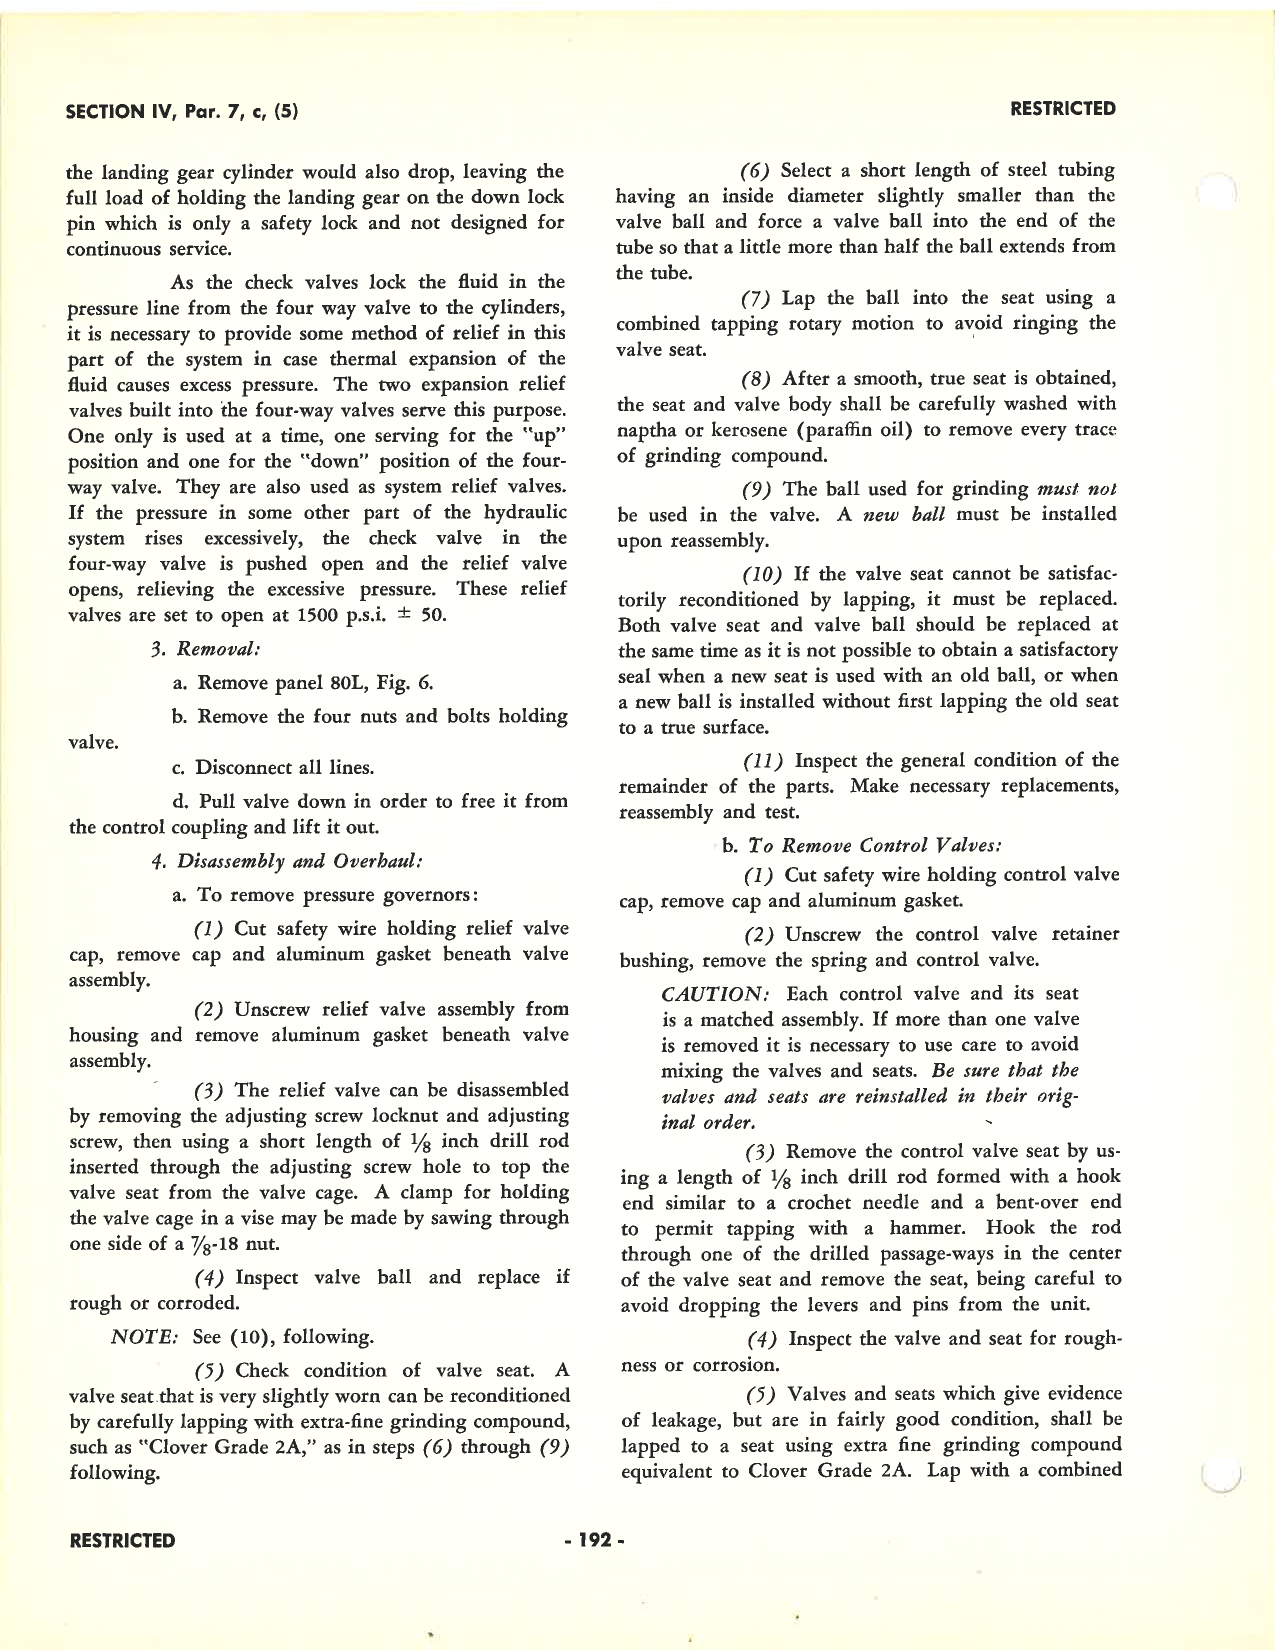 Sample page 193 from AirCorps Library document: Handbook of Instructions - Erection & Maintenance - P-38F